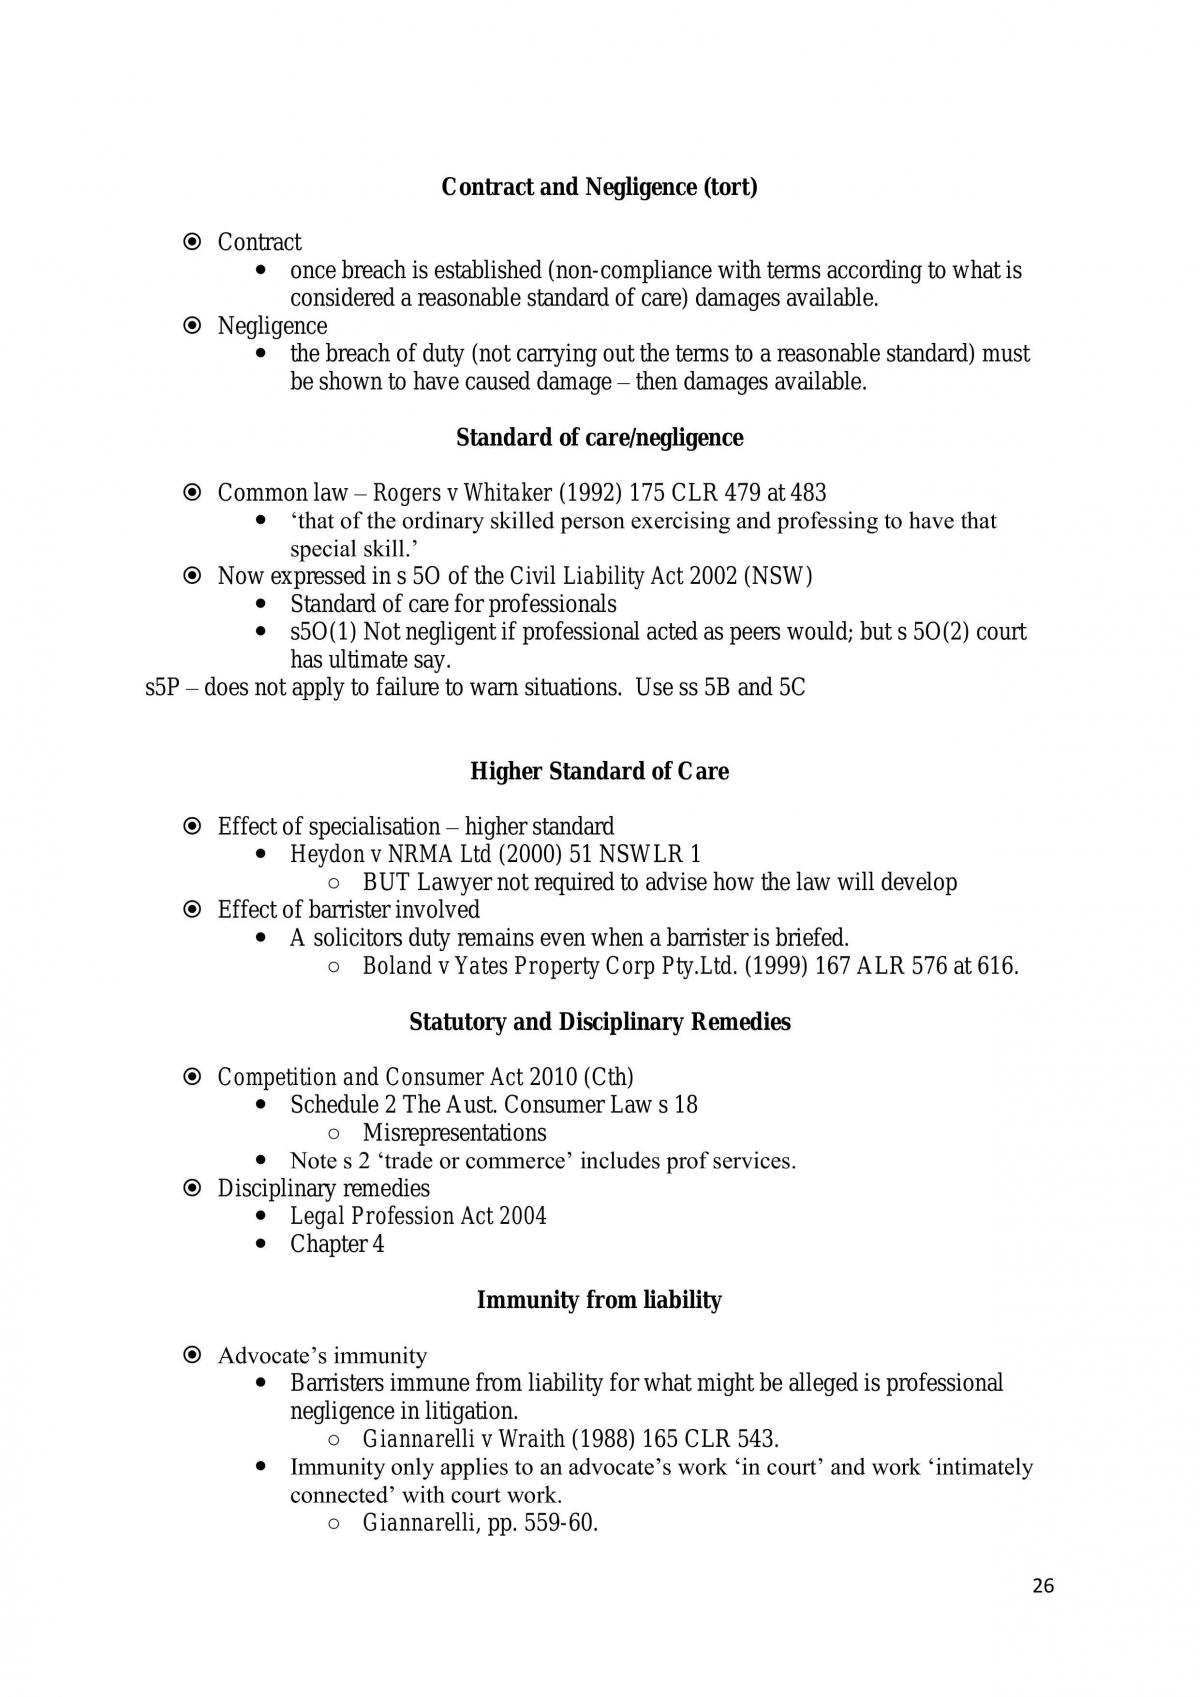 Full notes from LS320 Professional Conduct - Page 26